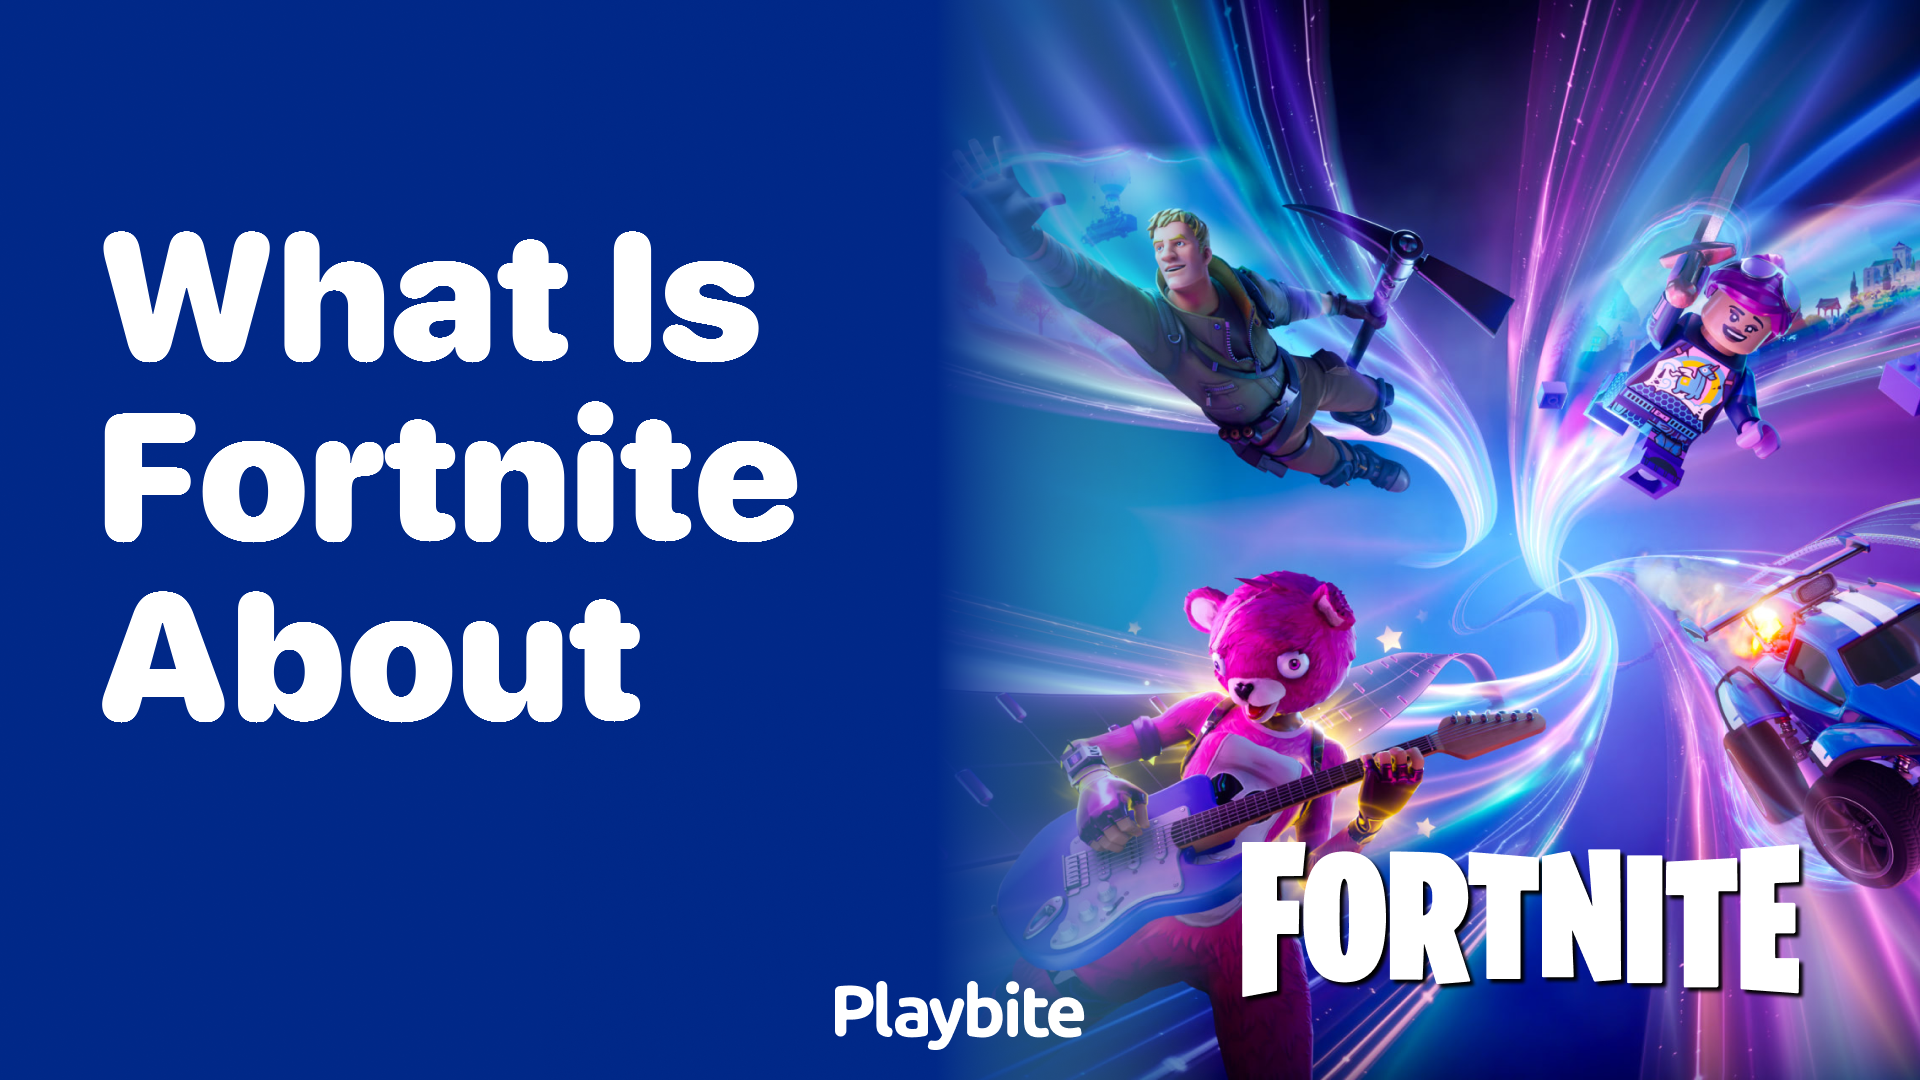 What Is Fortnite About? Dive Into This Epic Game!